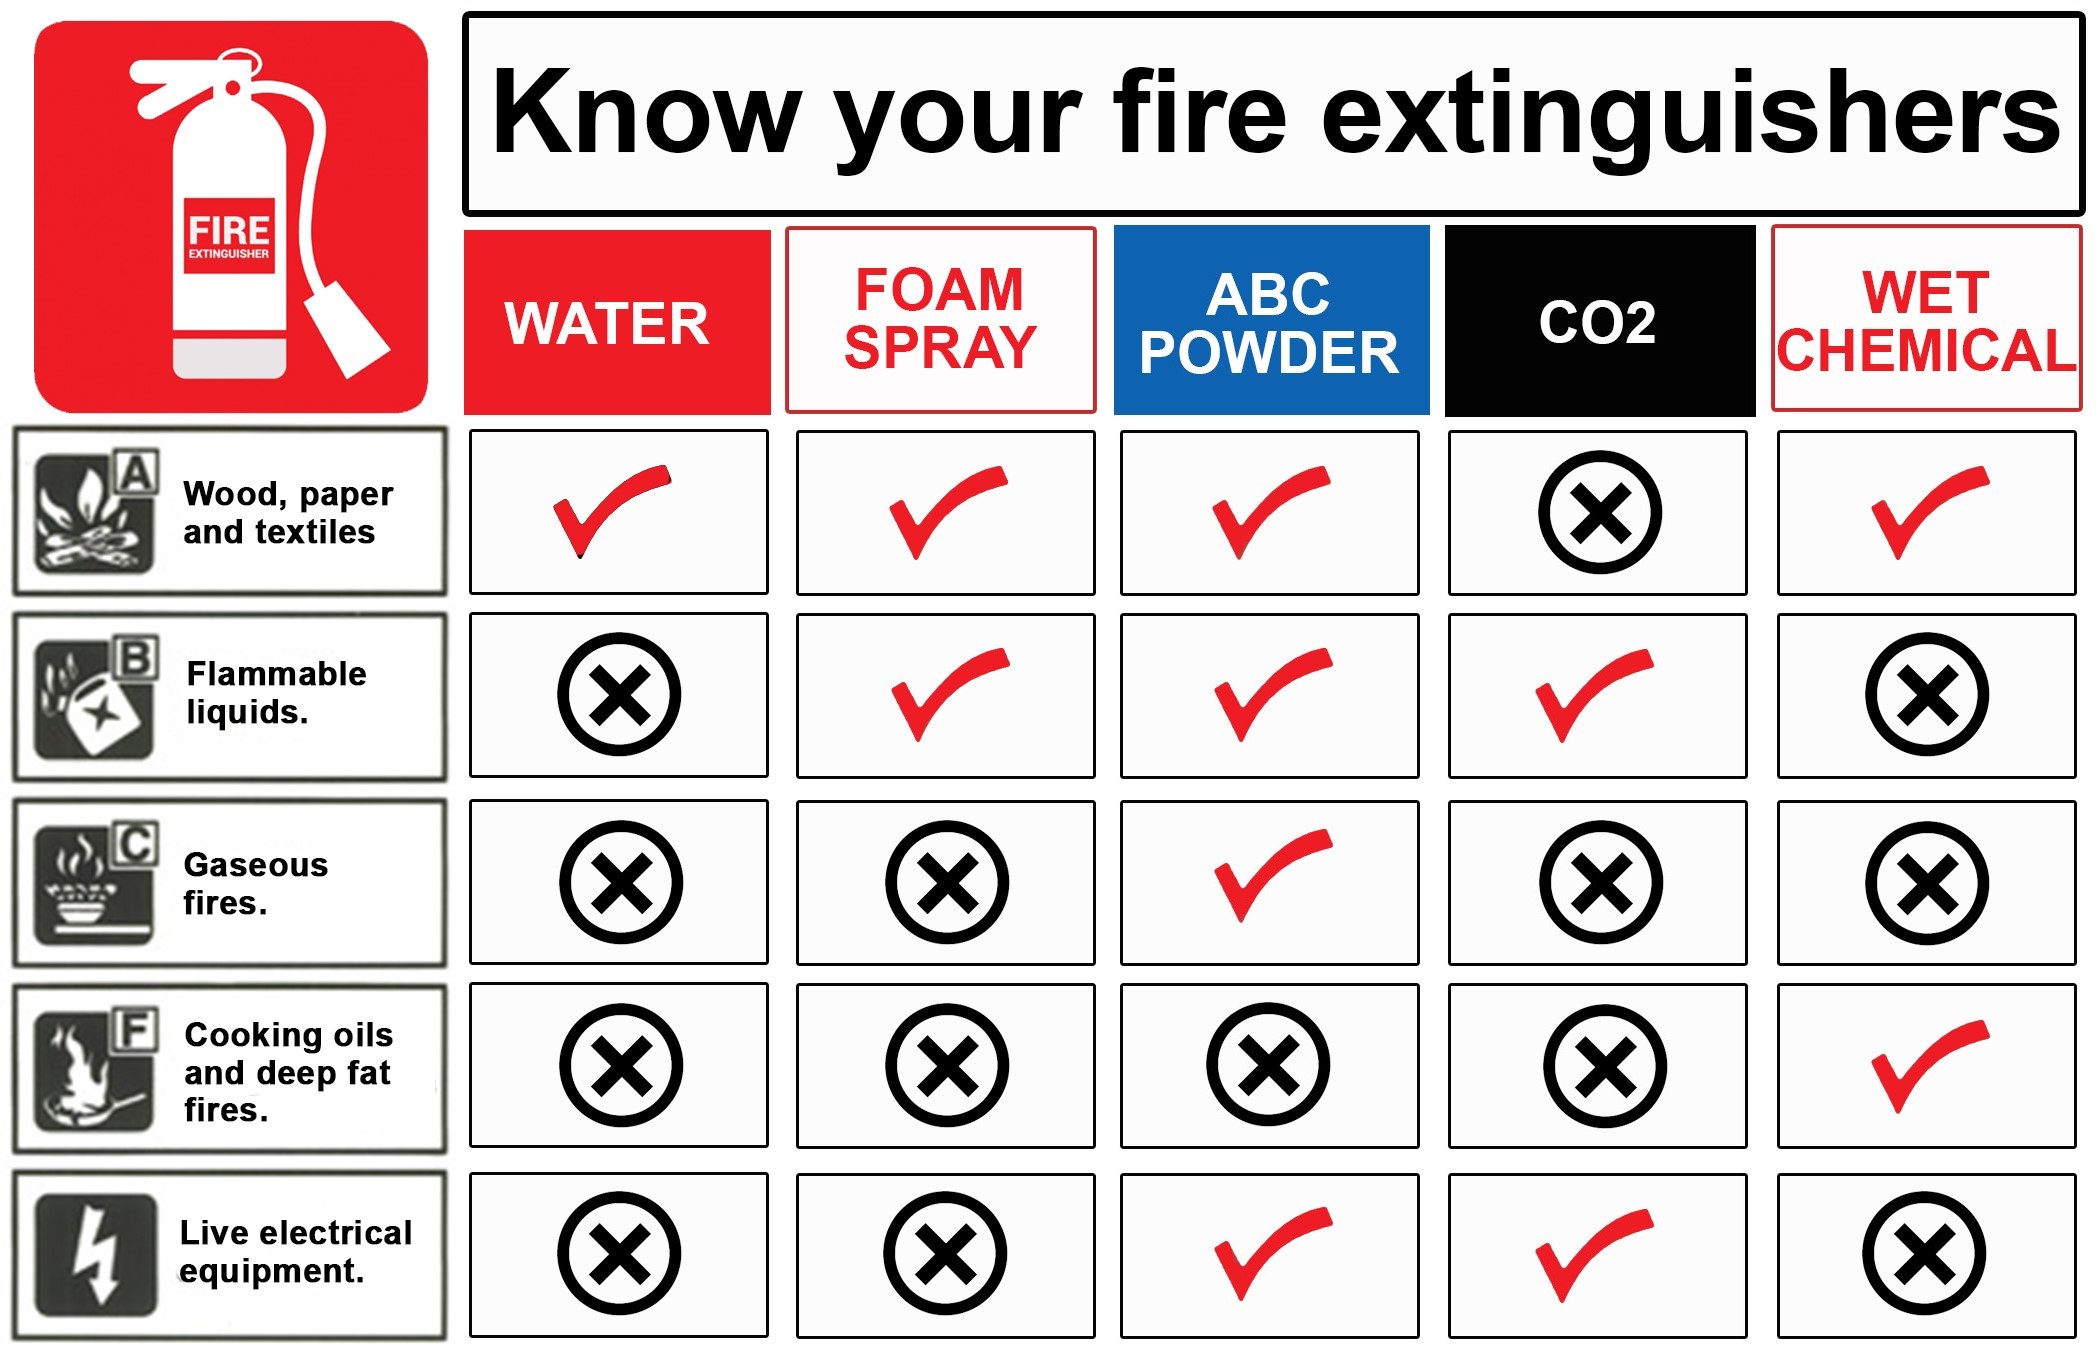 Know your fire extiguisher